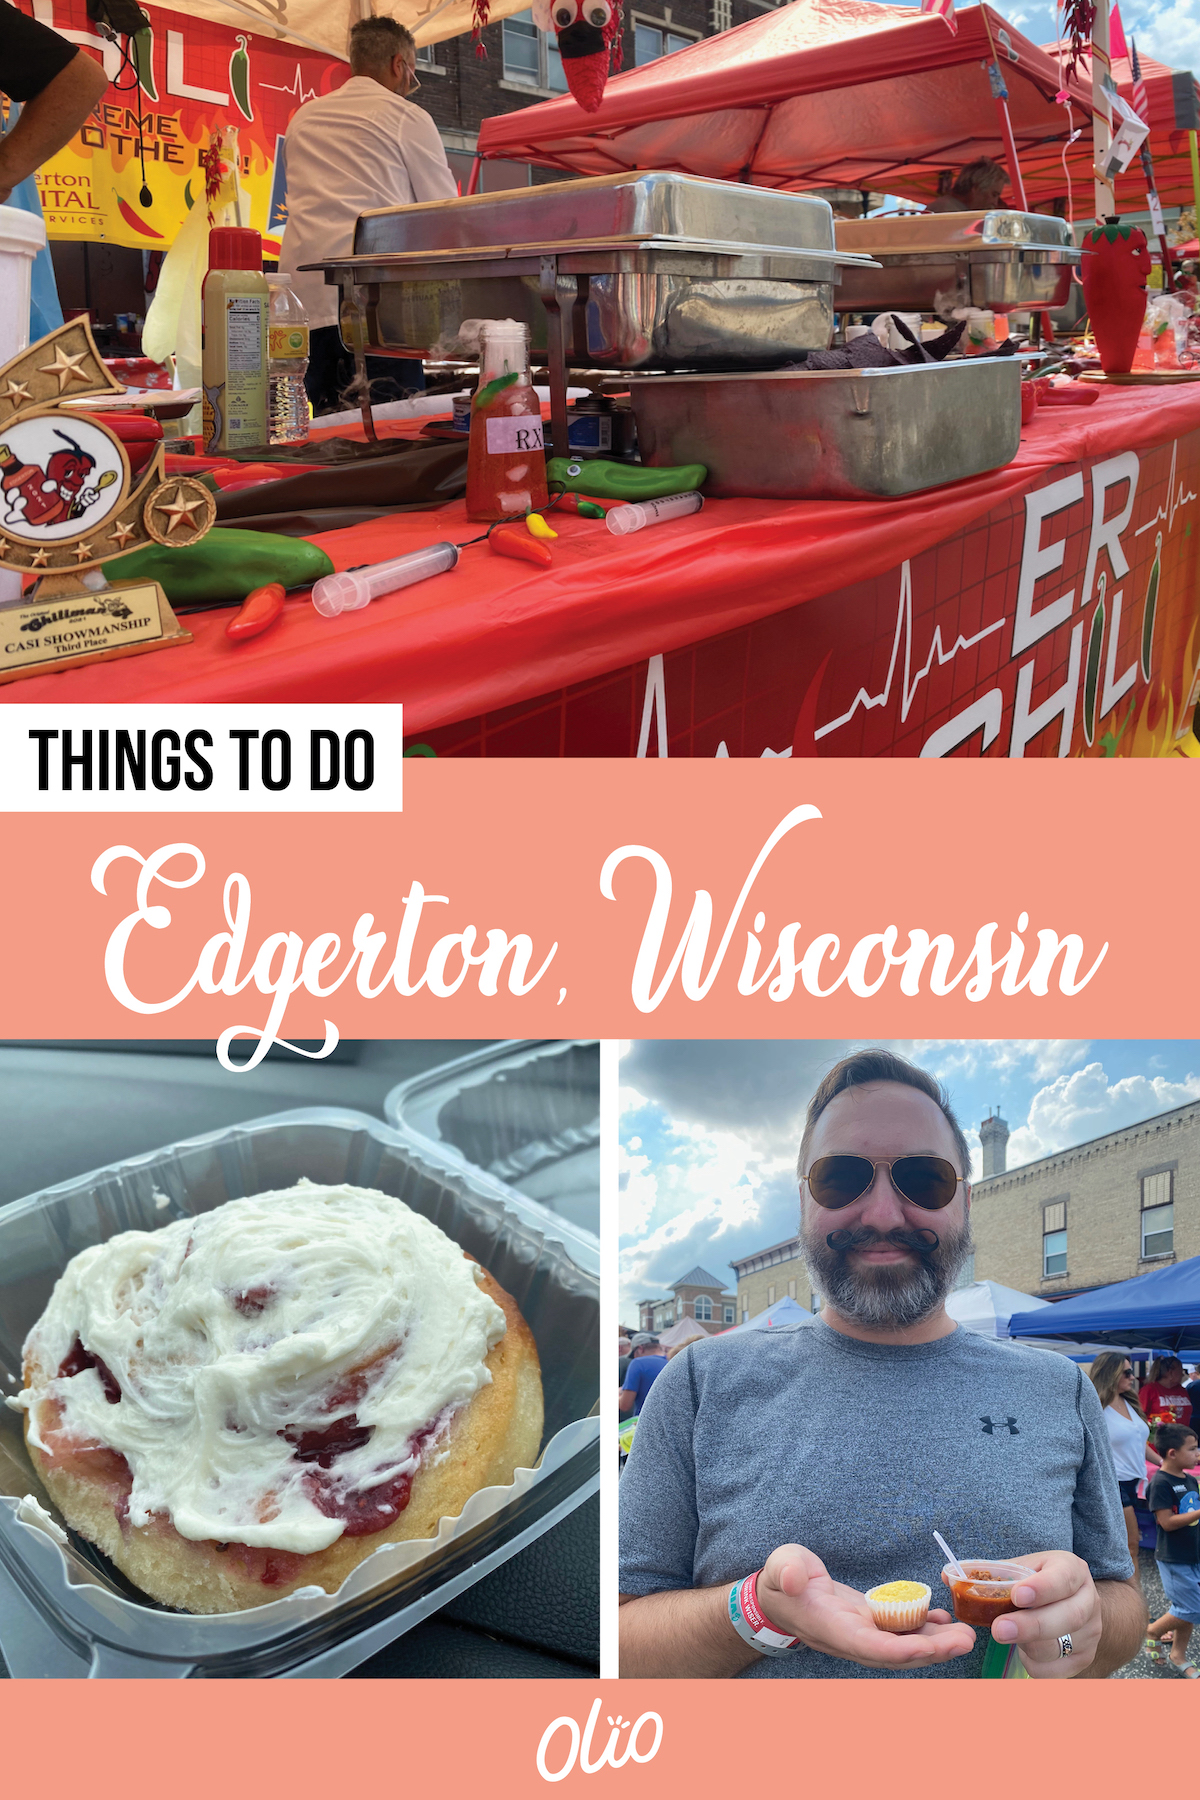 Whether you’re sampling dozens of chilis at Edgerton’s annual Chilimania festival or discovering the history of the Underground Railroad first hand at the Milton House Museum, there’s lots to explore in southwest Wisconsin. In easy driving distance from Janesville, both Edgerton and Milton are smaller communities that are perfect for a Wisconsin day trip. The next time you’re in the area, be sure to check out a few of these things to do in Edgerton and Milton, Wisconsin.